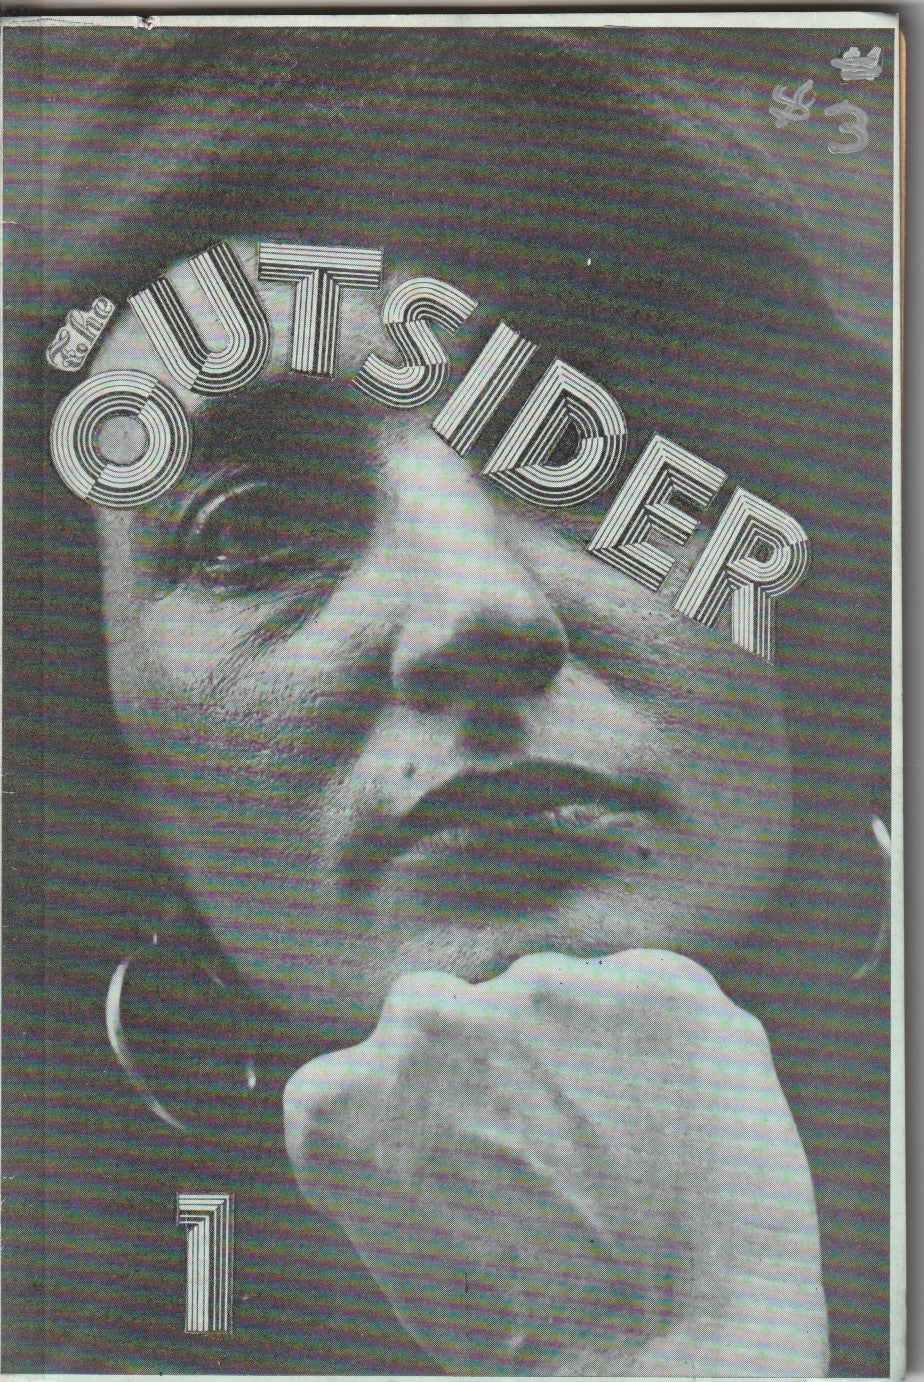 The Outsider 1-3 in Custom Boxes: Number 1 Inscribed by Gypsy Lou, Number 3 Signed by Charles Bukowski